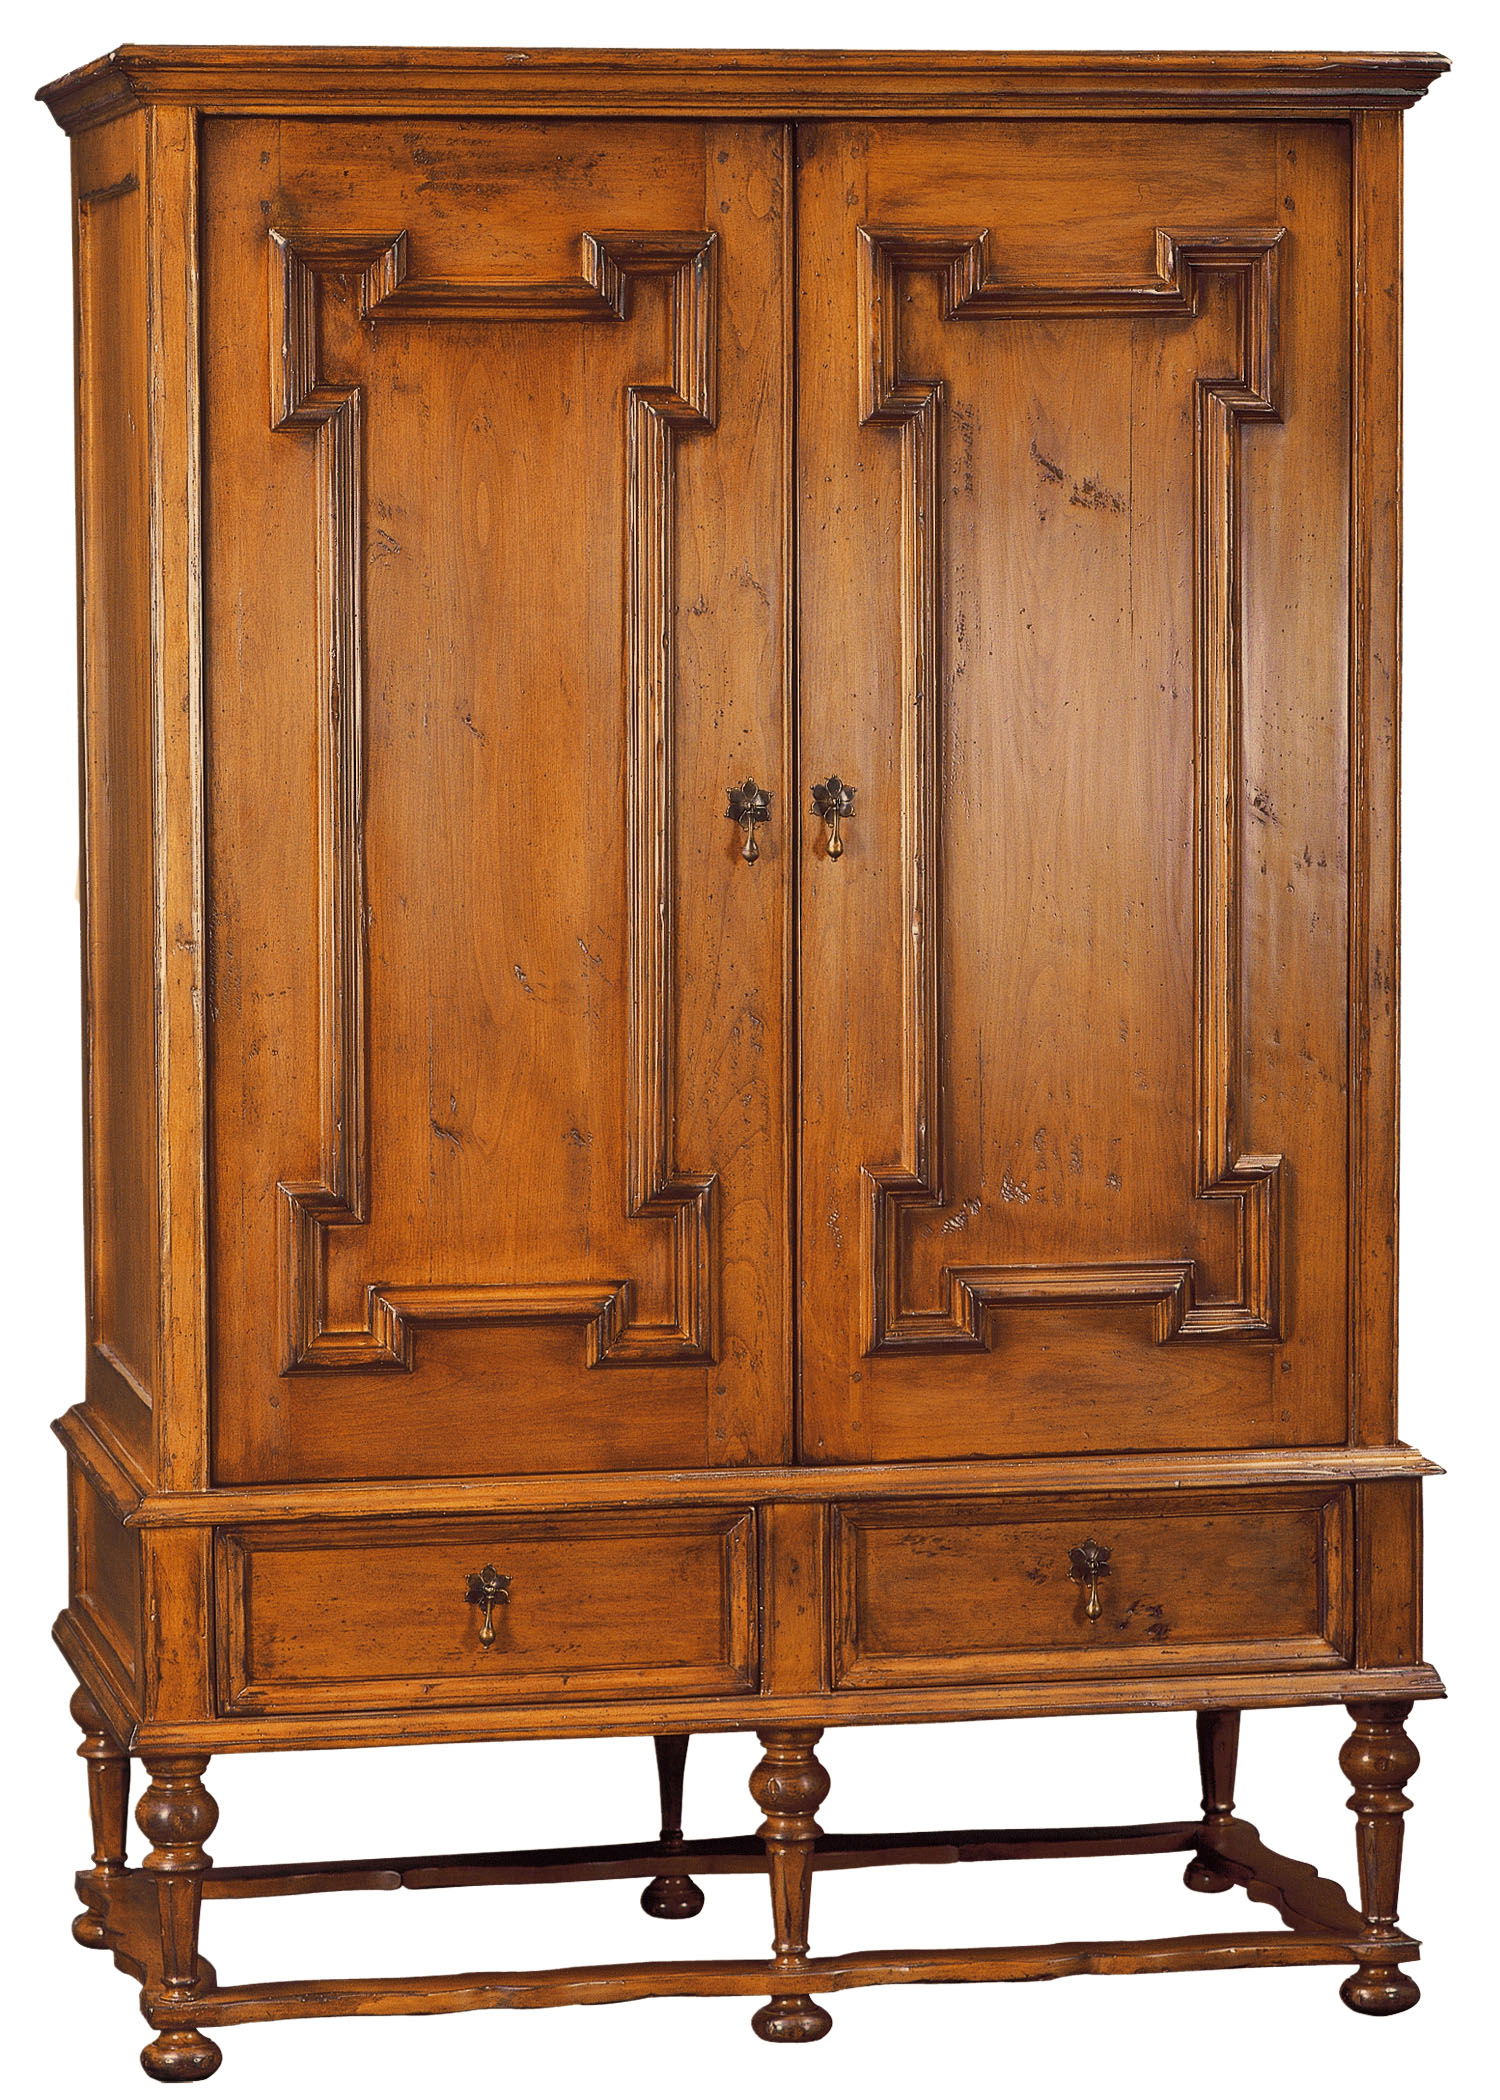 Neville traditional cabinet with doors and drawers by Woodland furniture in Idaho falls